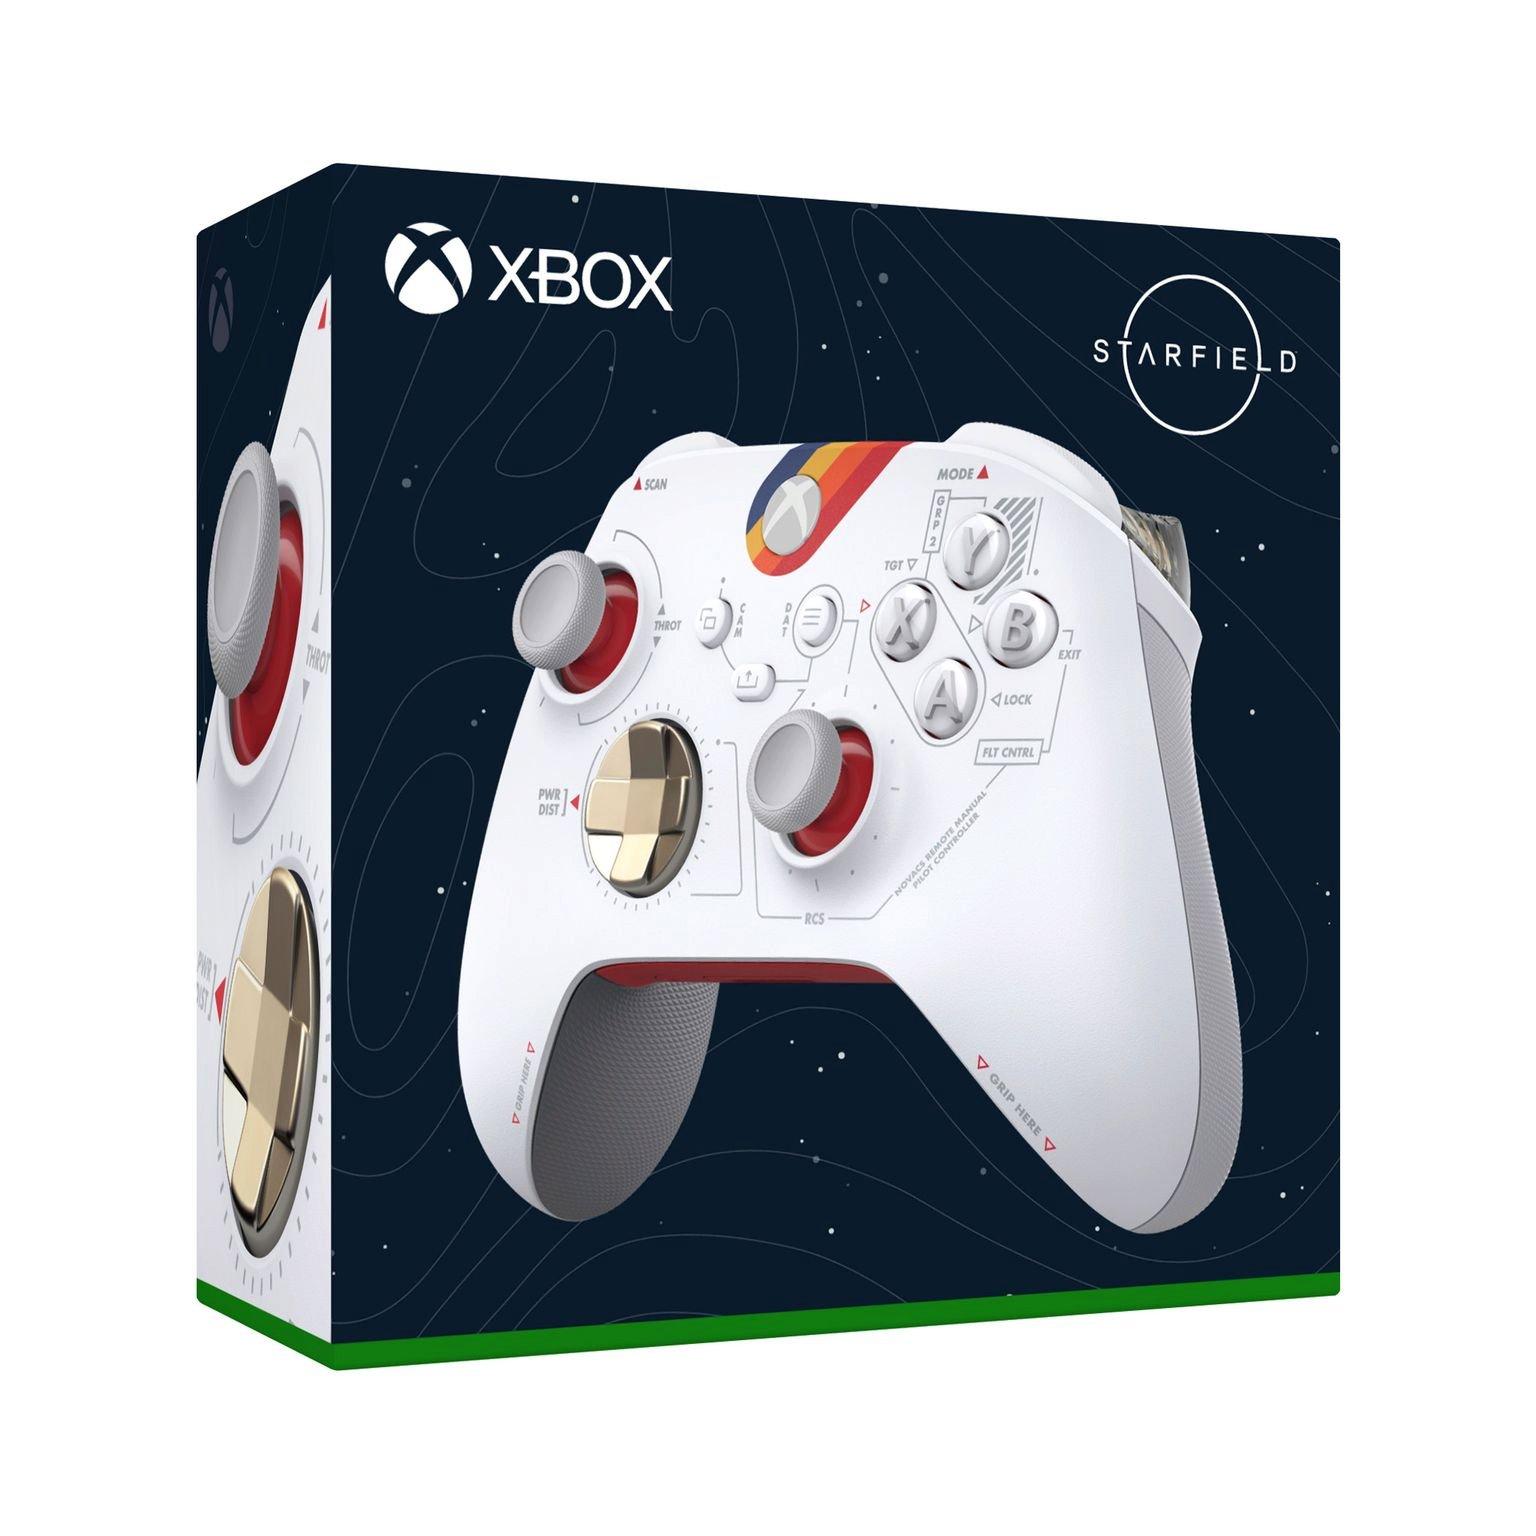 Microsoft Xbox Wireless Controller Starfield Limited Edition for Xbox Series X/S, Xbox One, and Windows Devices